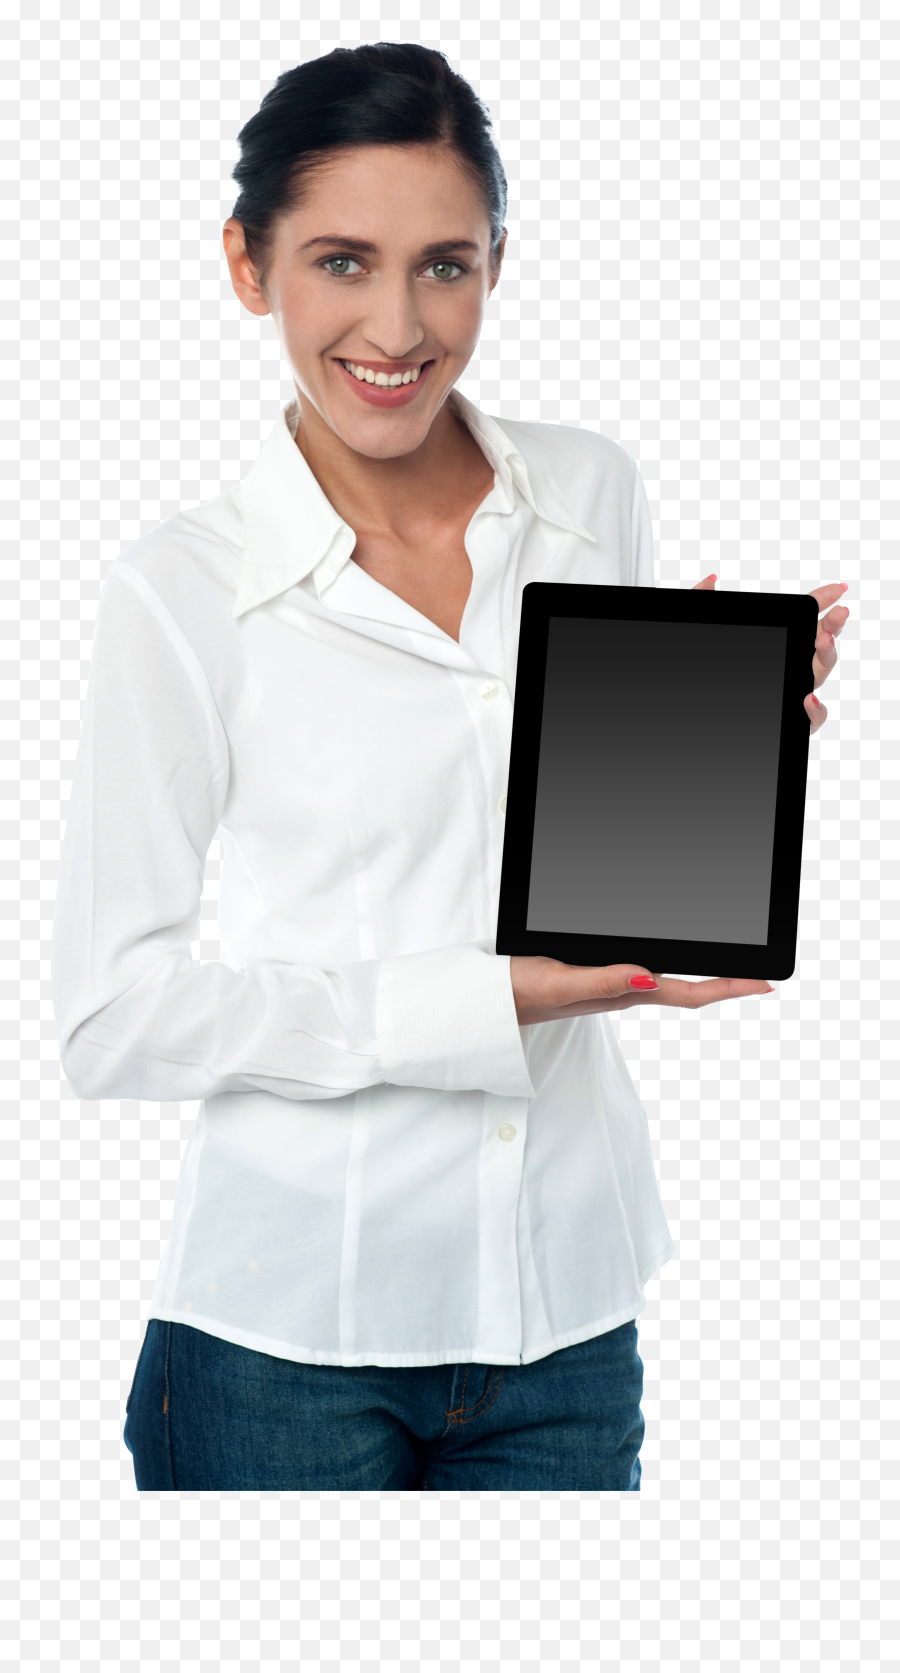 Download Woman Holding Ipad Png Image